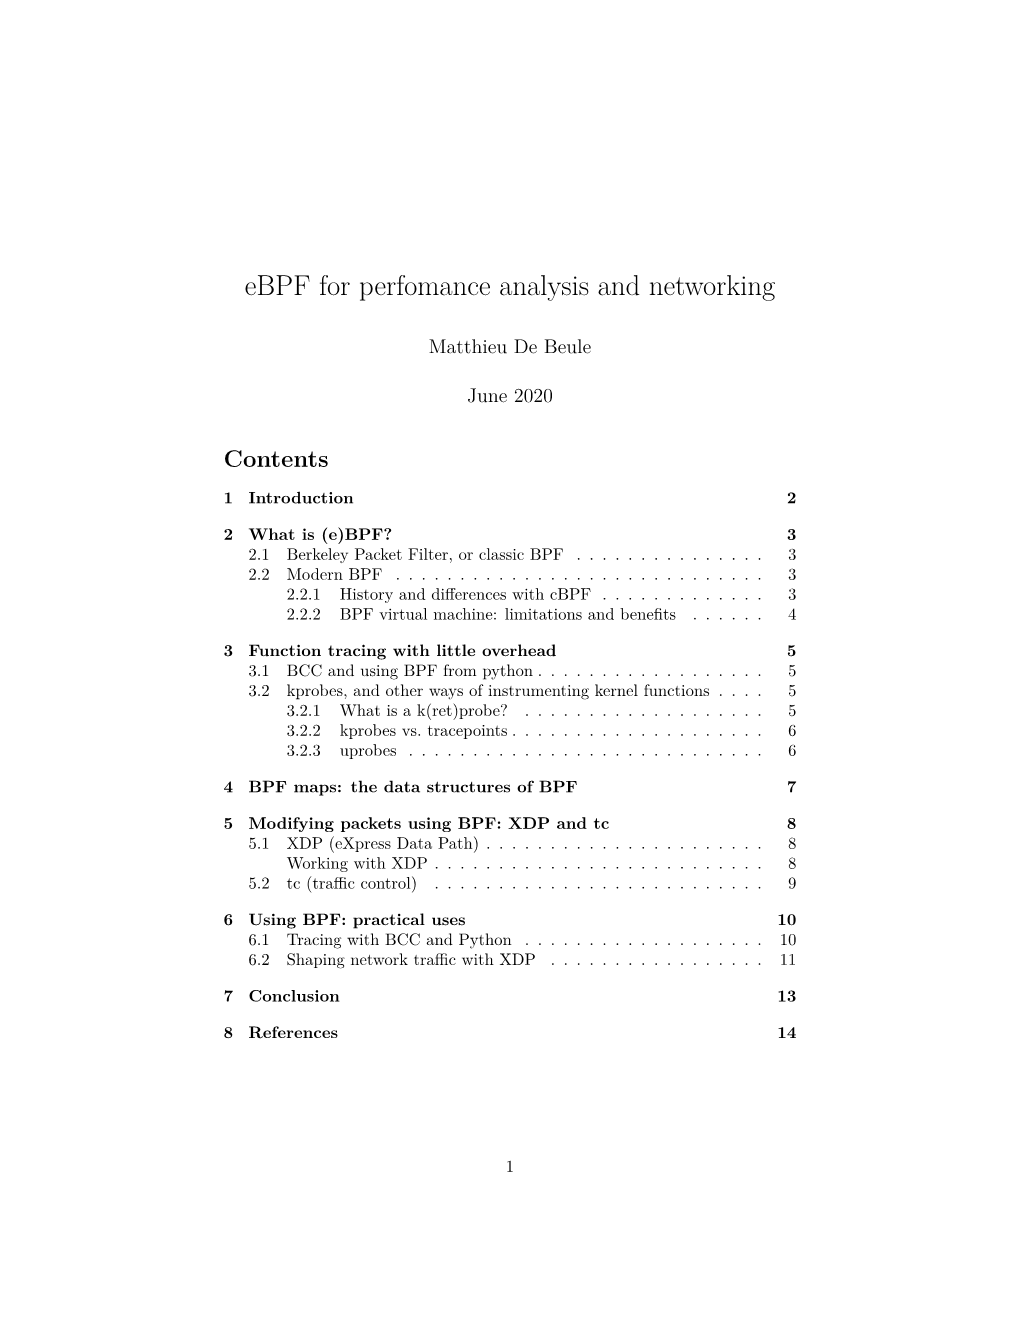 Ebpf for Perfomance Analysis and Networking